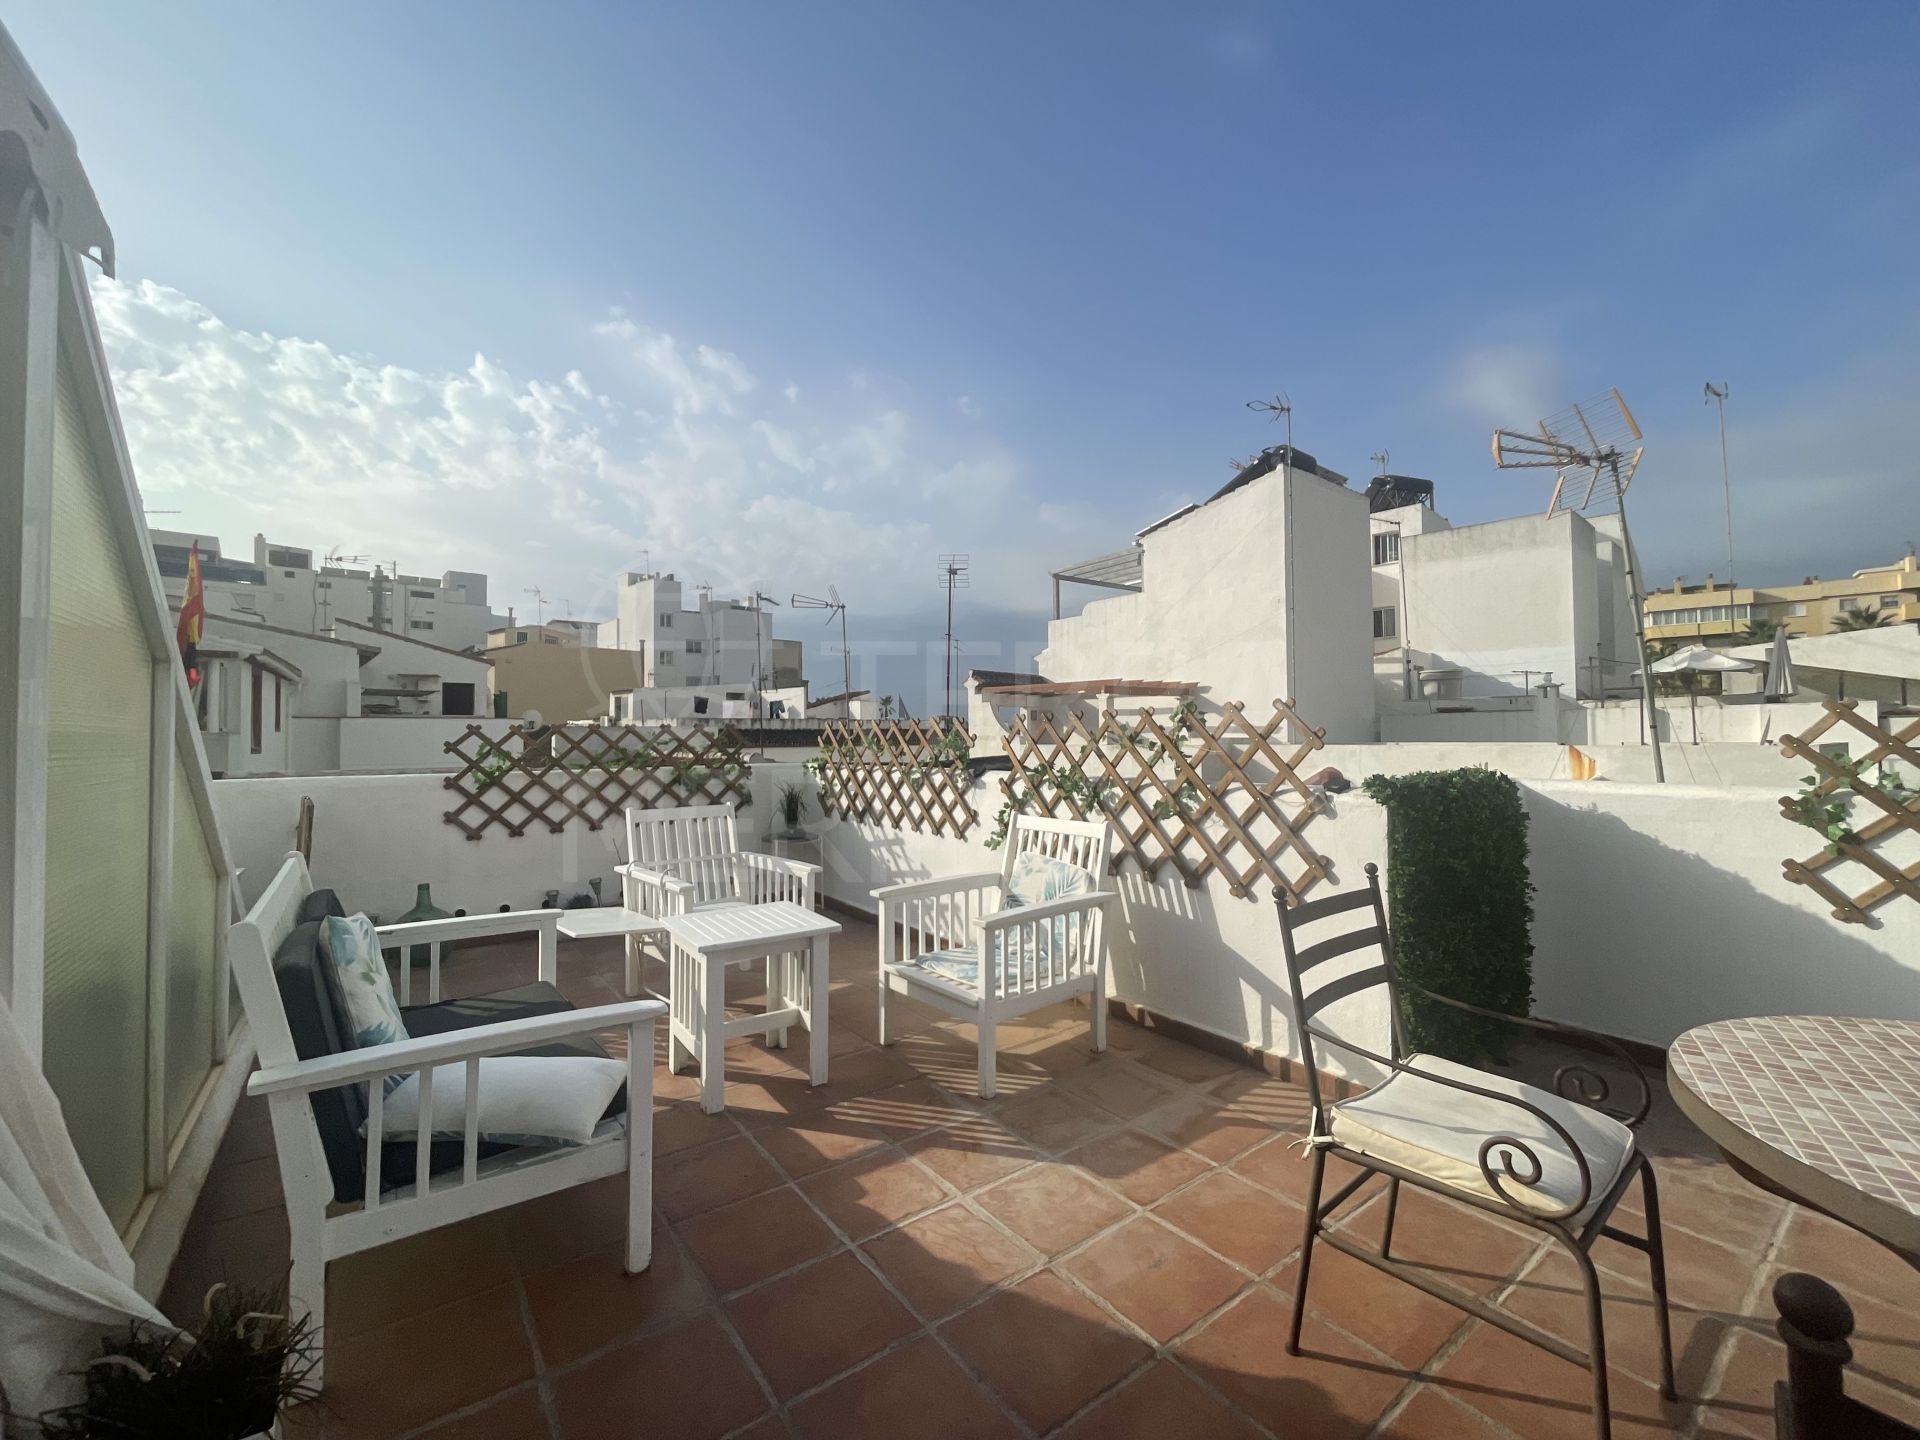 Great townhouse for sale in the old town of Estepona, with tourist apartment business